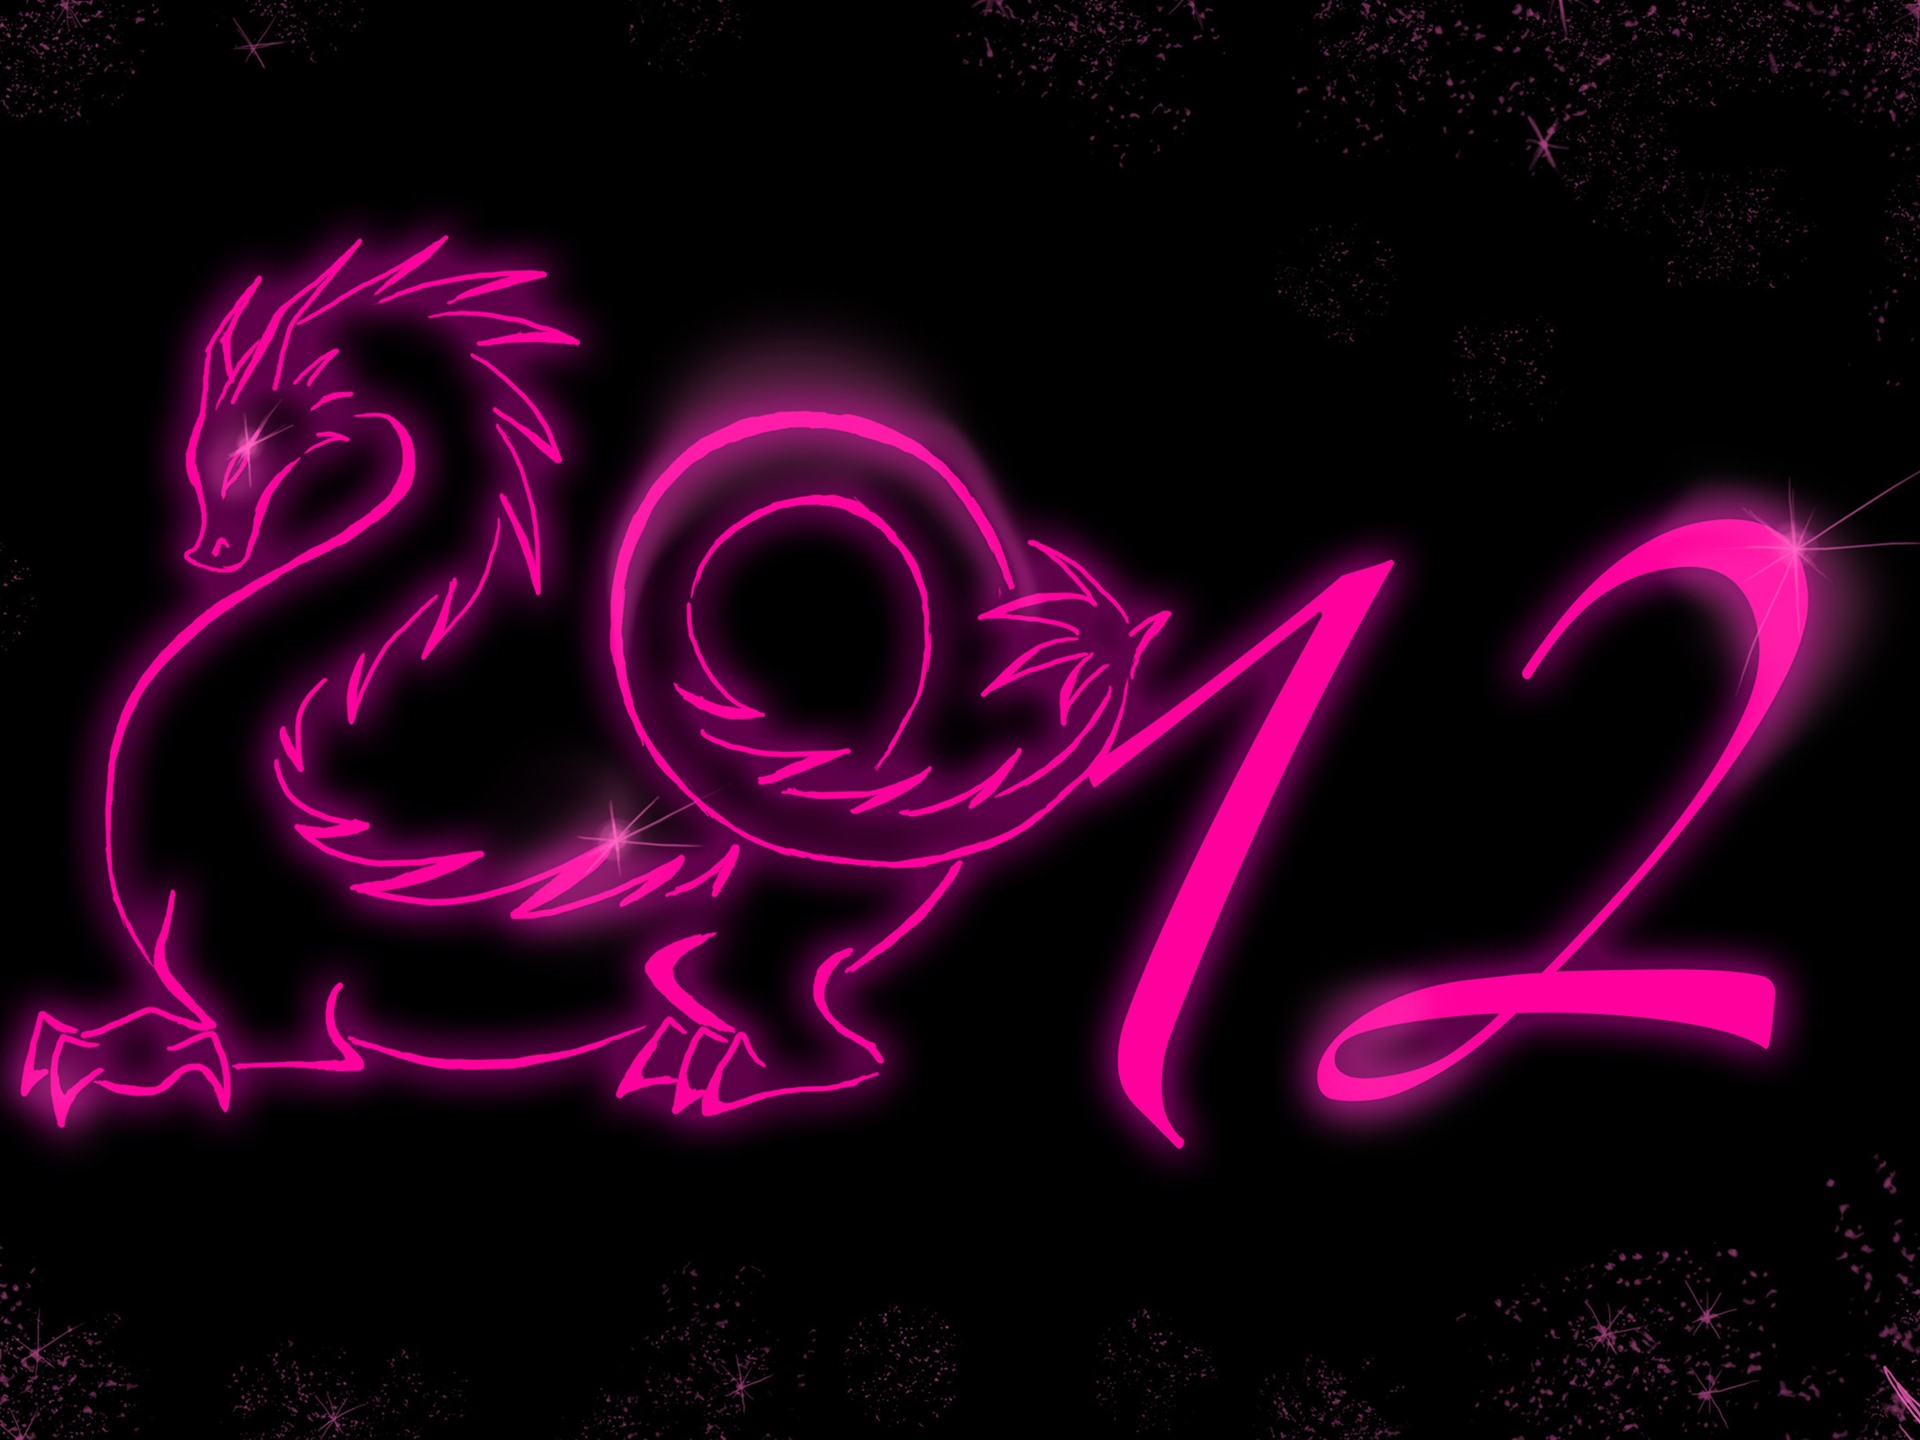 2012 New Year wallpapers (1) #16 - 1920x1440